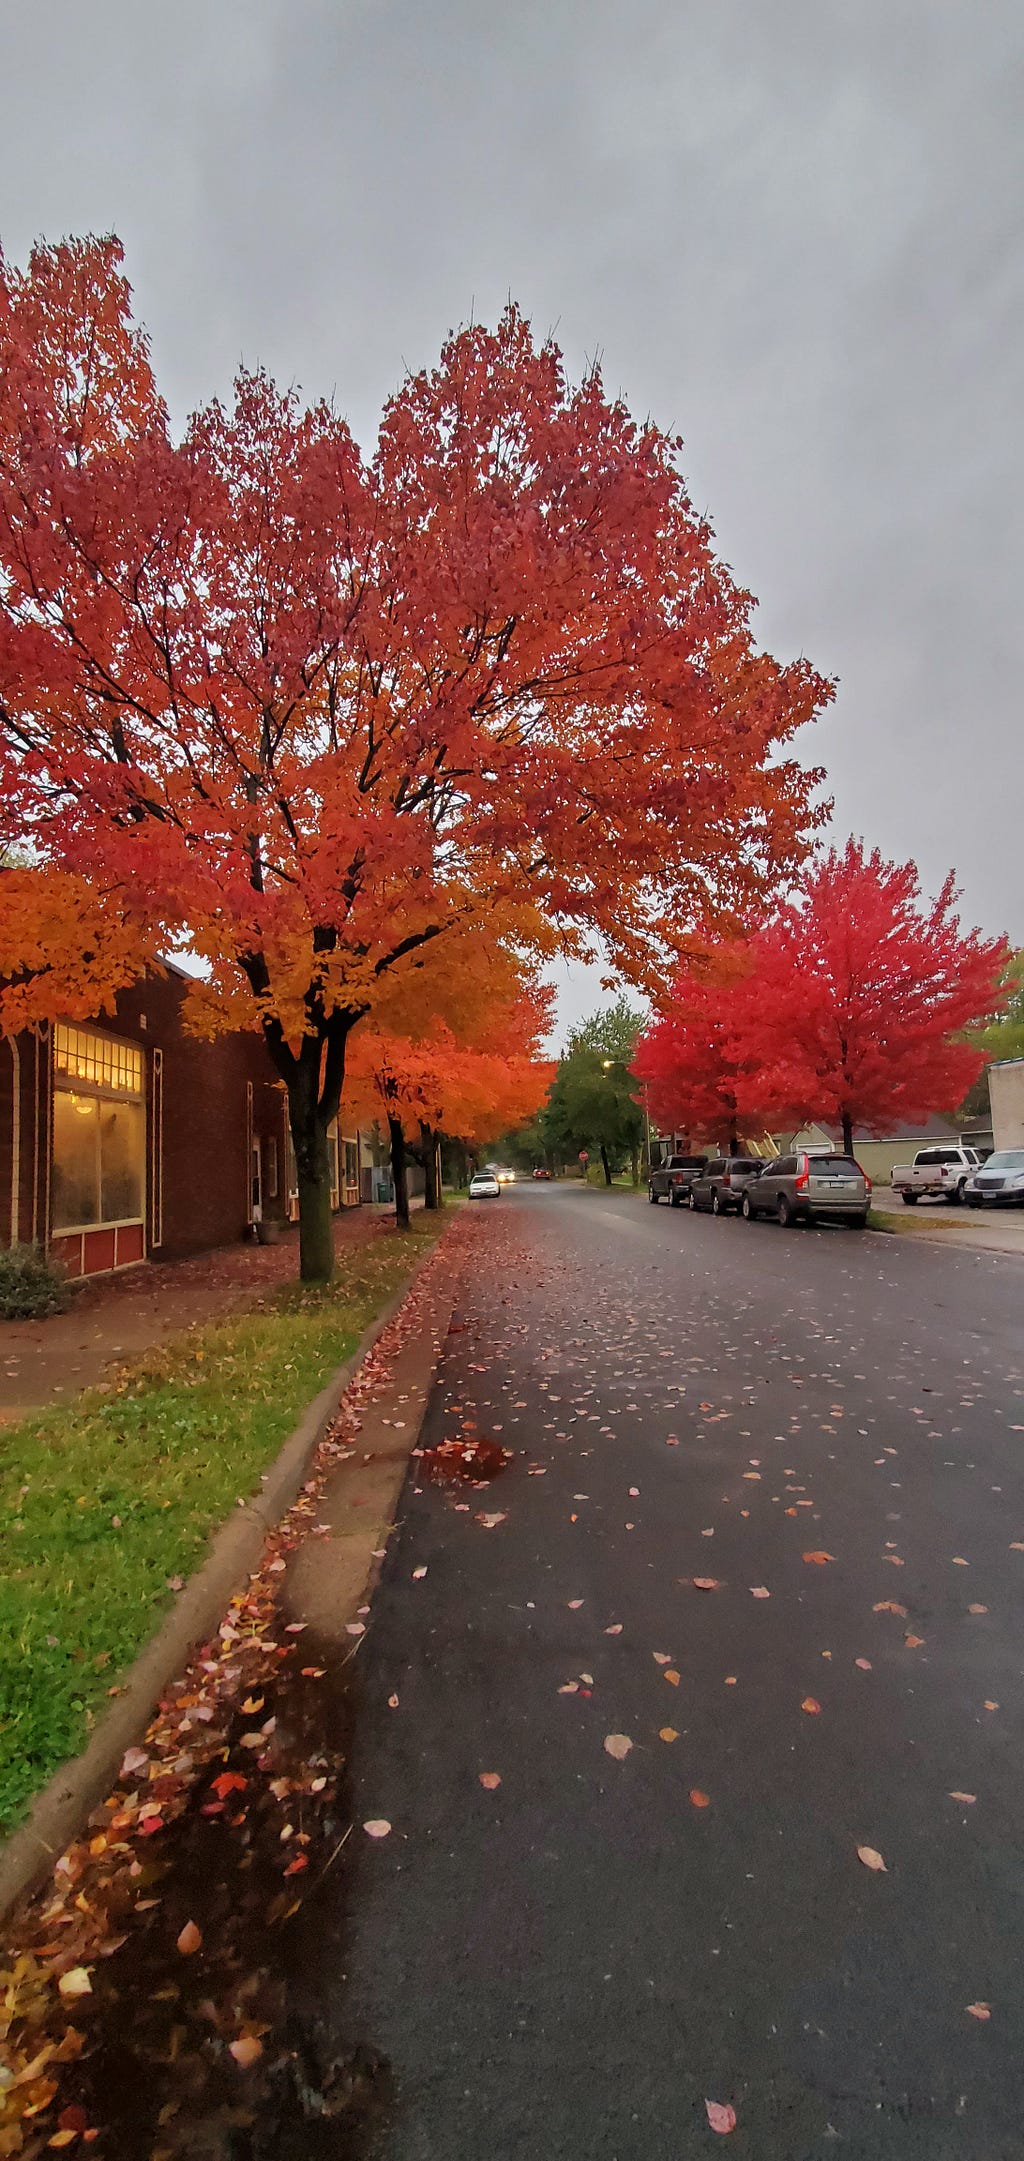 Brilliant orange and red hues of leaves in the Fall